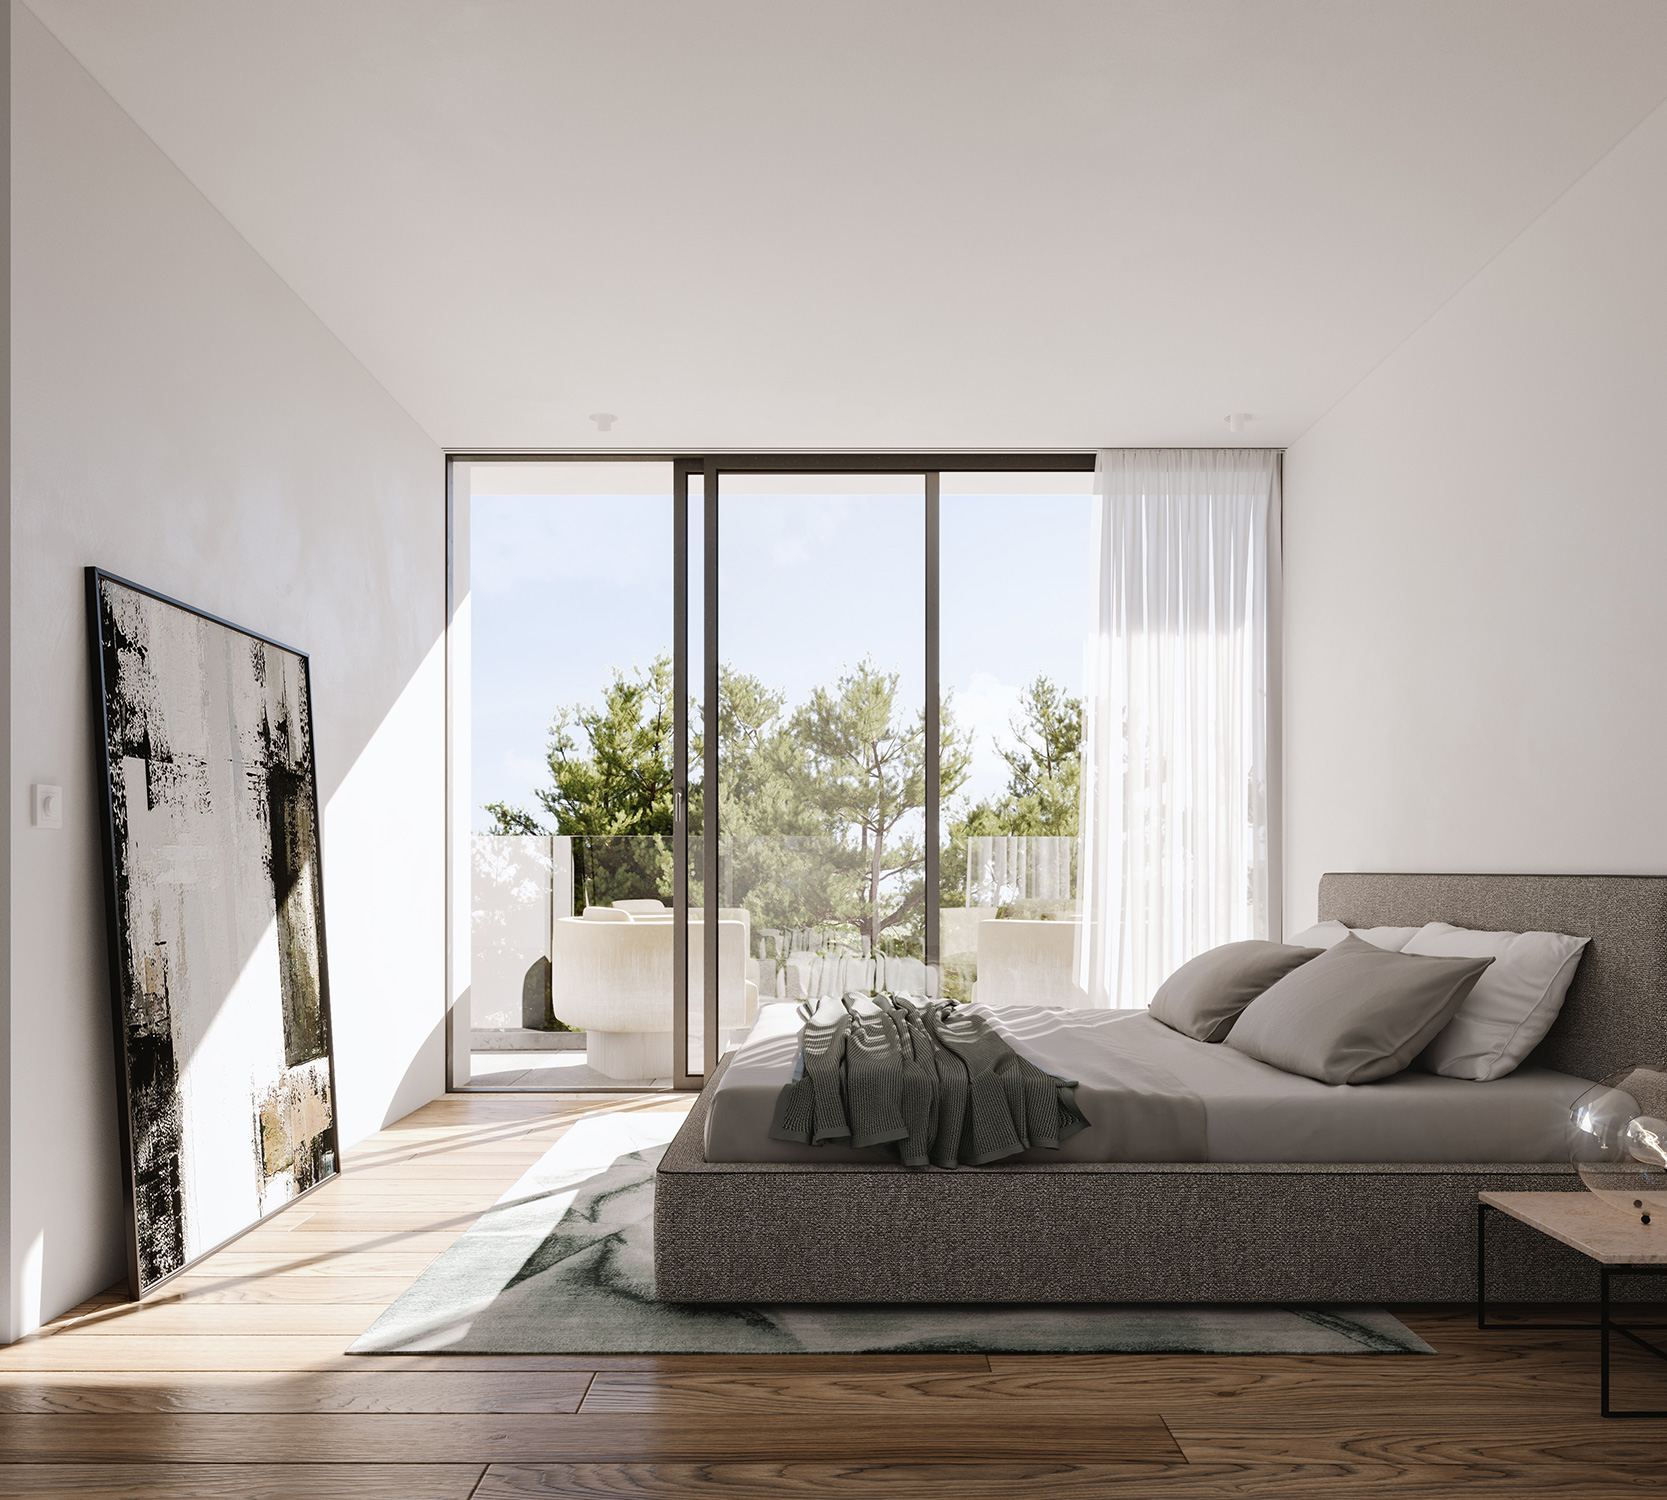 Aljezur - The house with the palm tree - Master bedroom | GDA-V Architectural Visualization